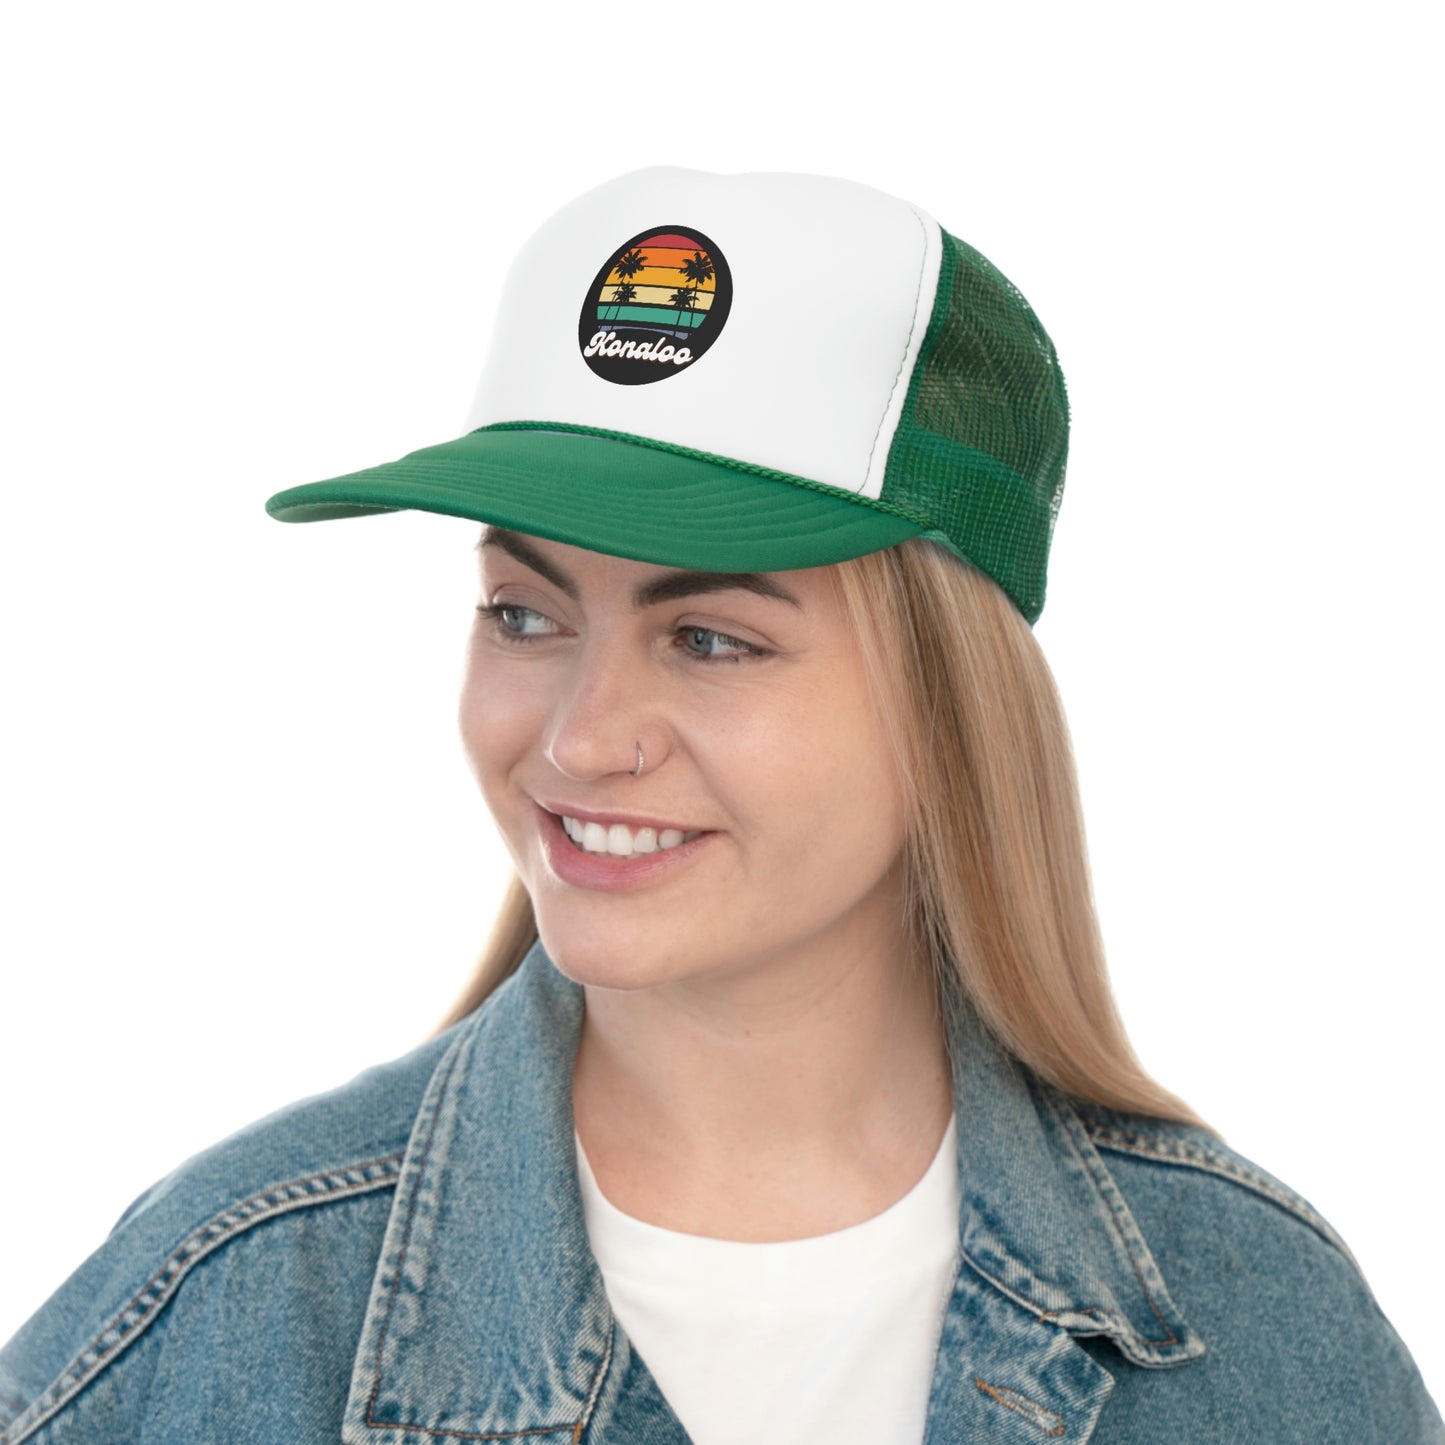 Hat Get Your Retro Vibes On with Our Trucker Caps - Featuring Palm Tree Shadows